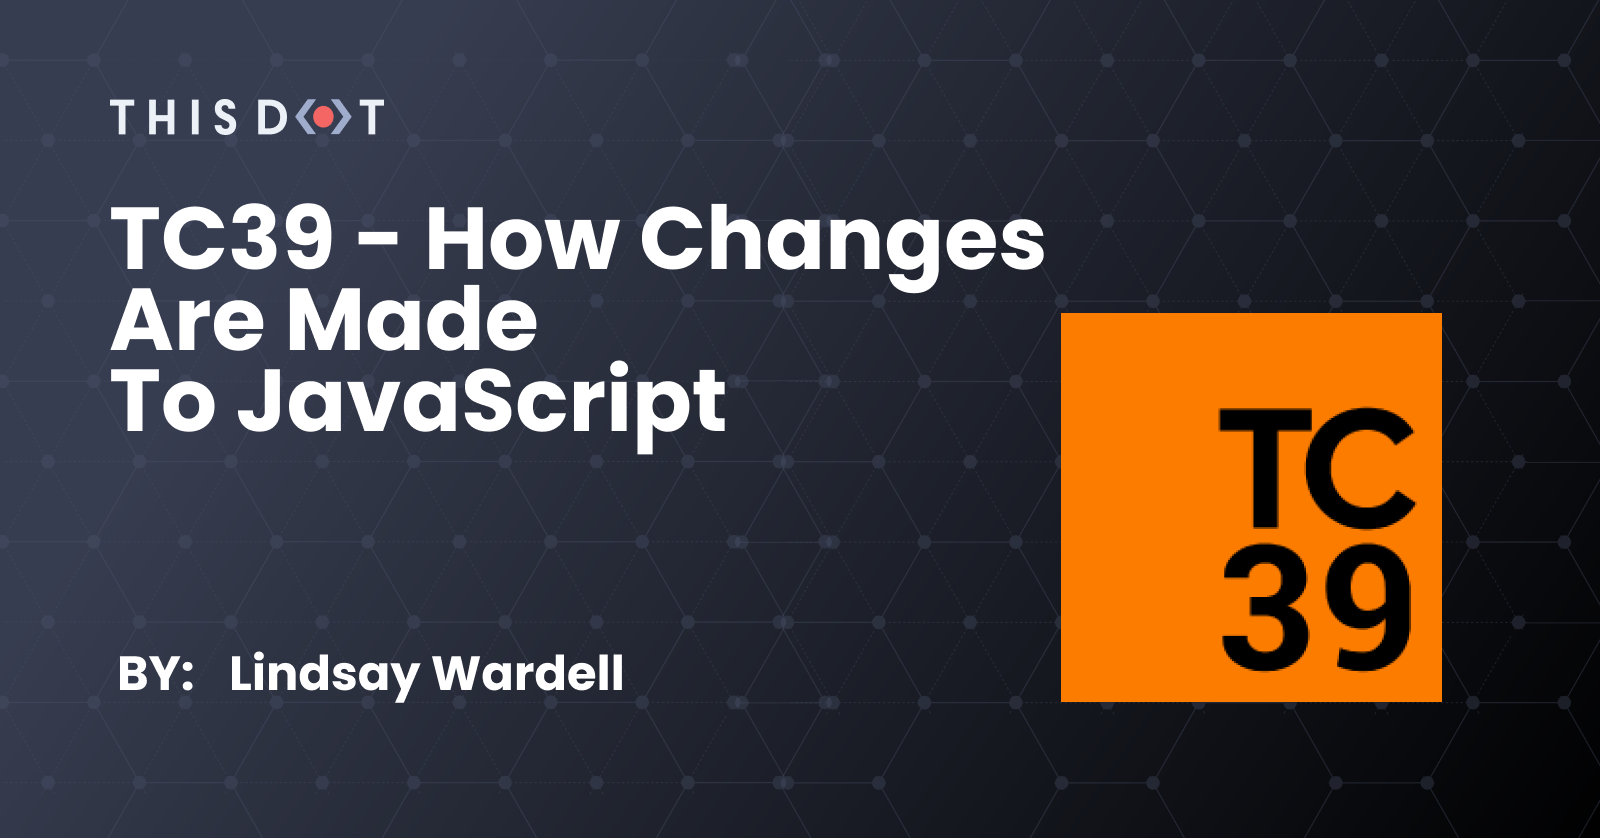 TC39 - How Changes are Made to JavaScript